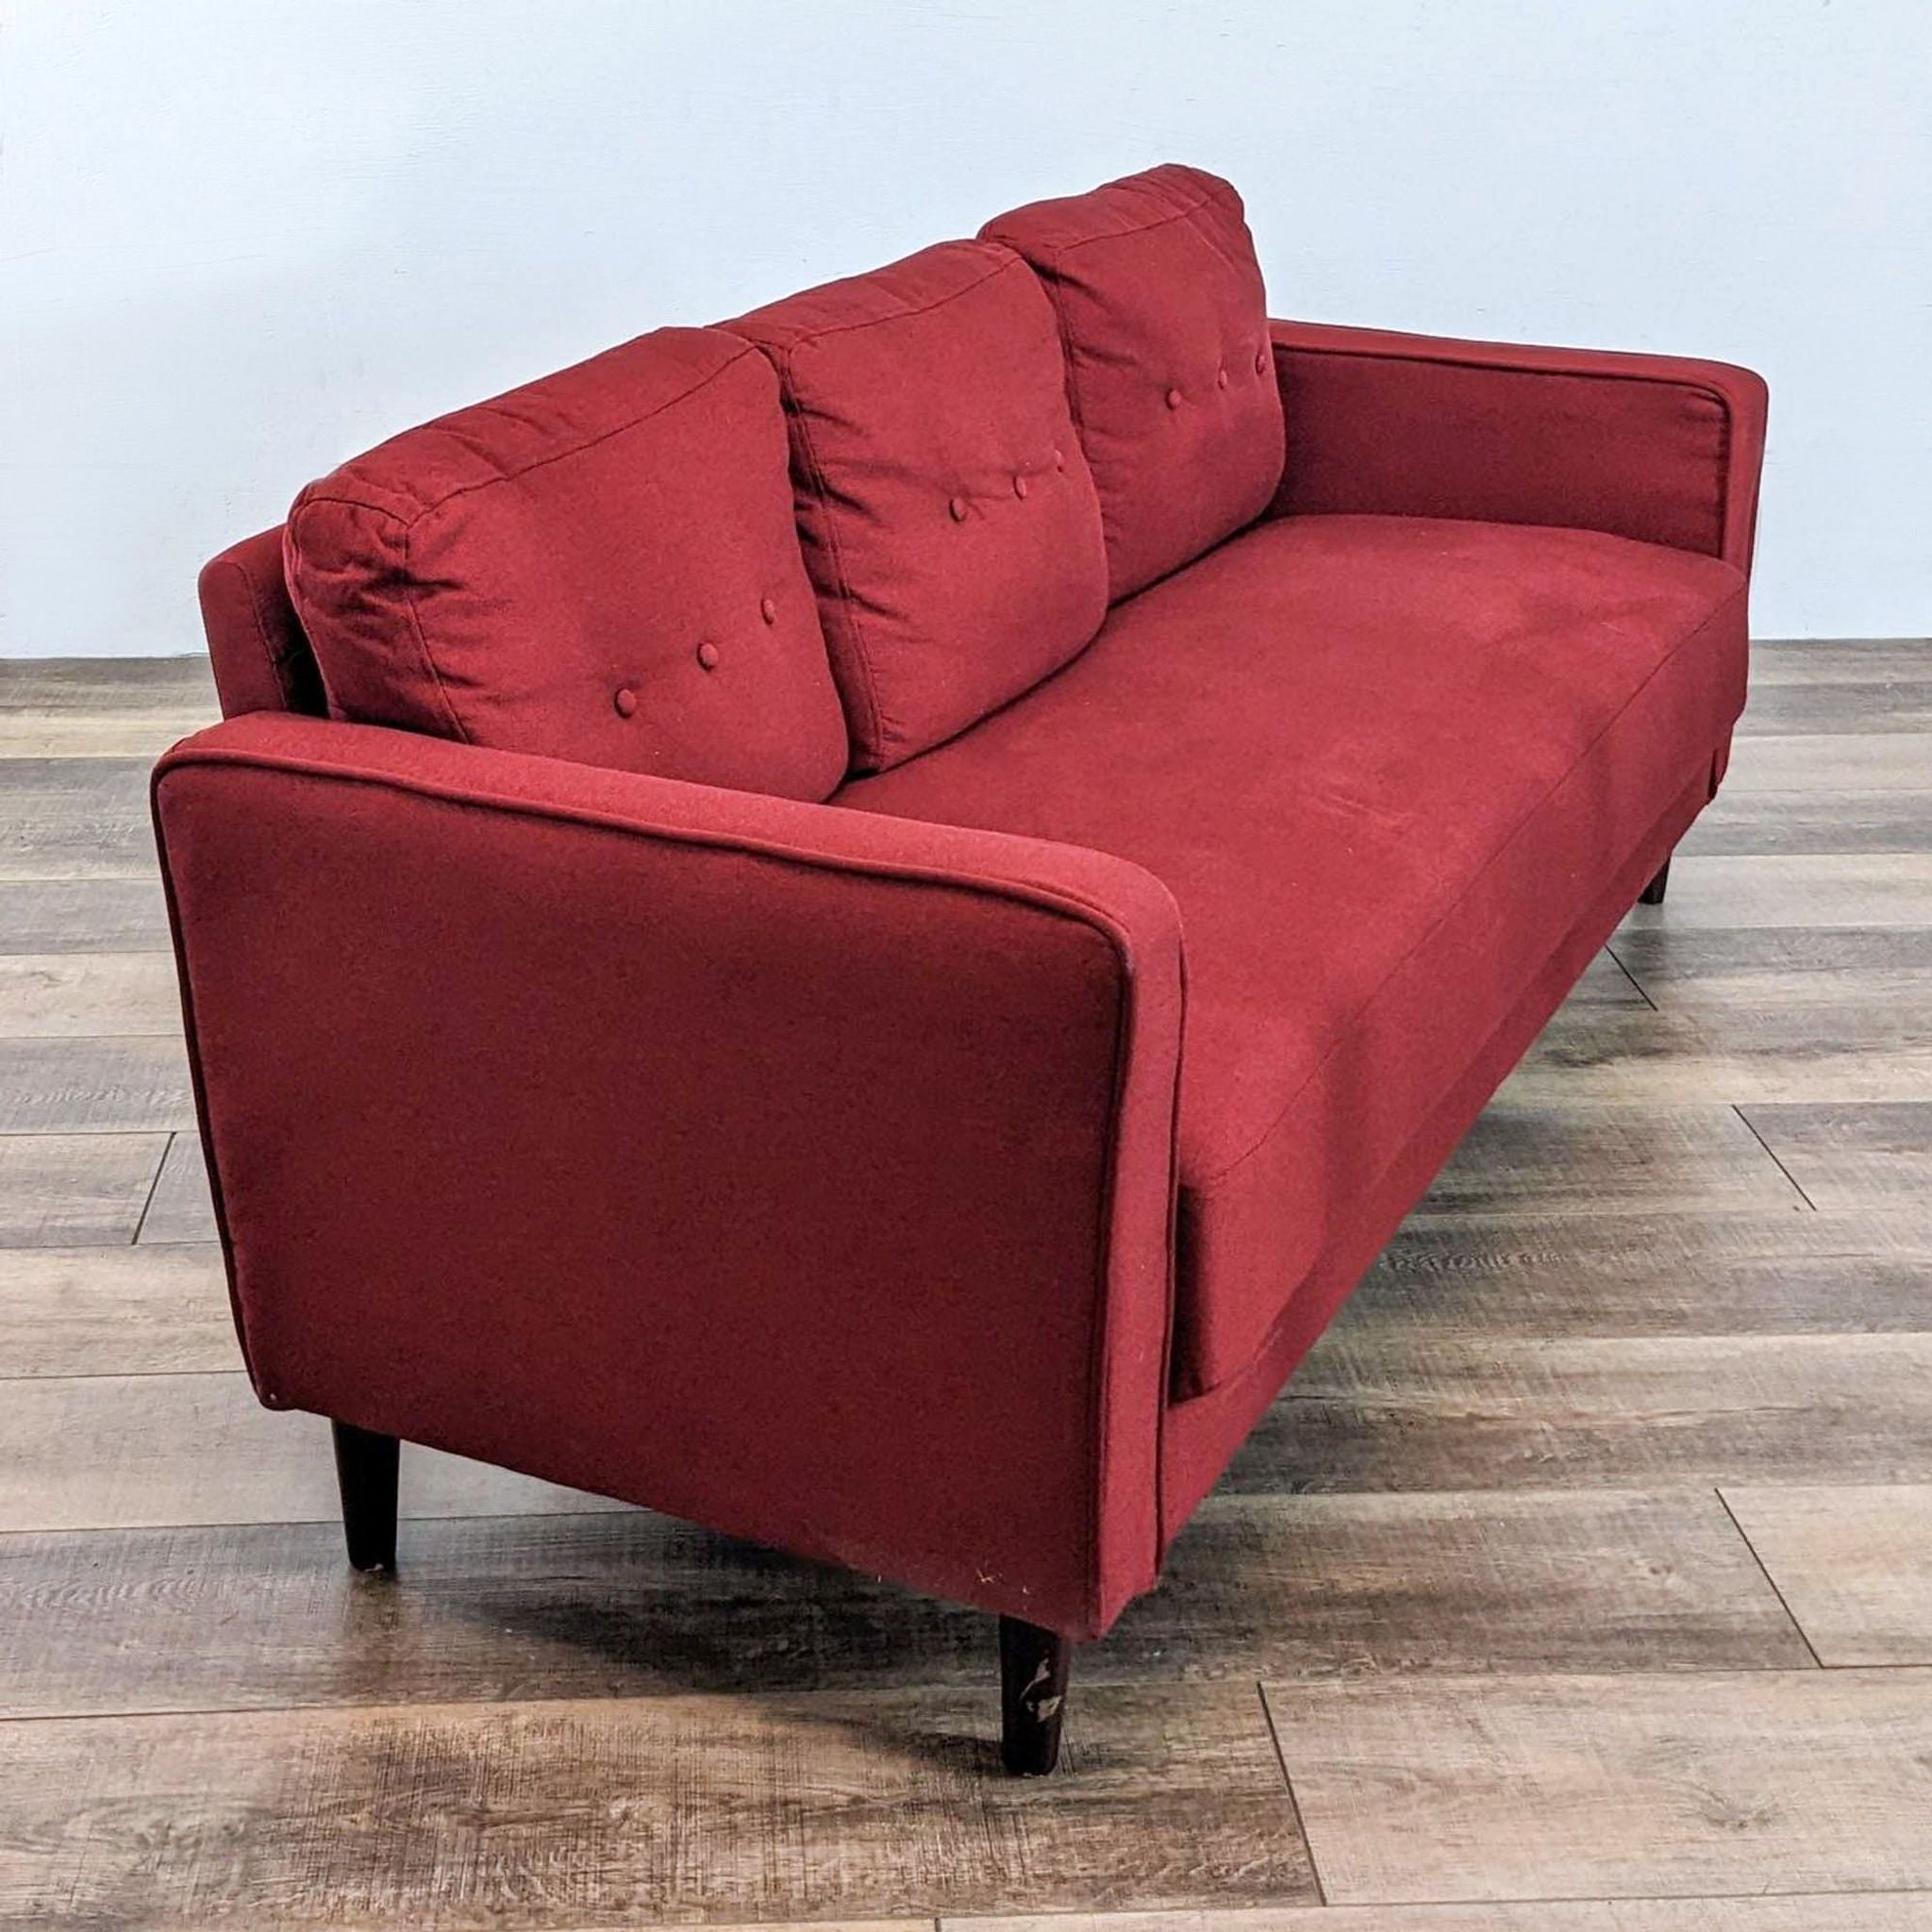 2. Angled view of a Zinus Mikhail 3-seater in red with distinctive track arms and button-tufted cushions.